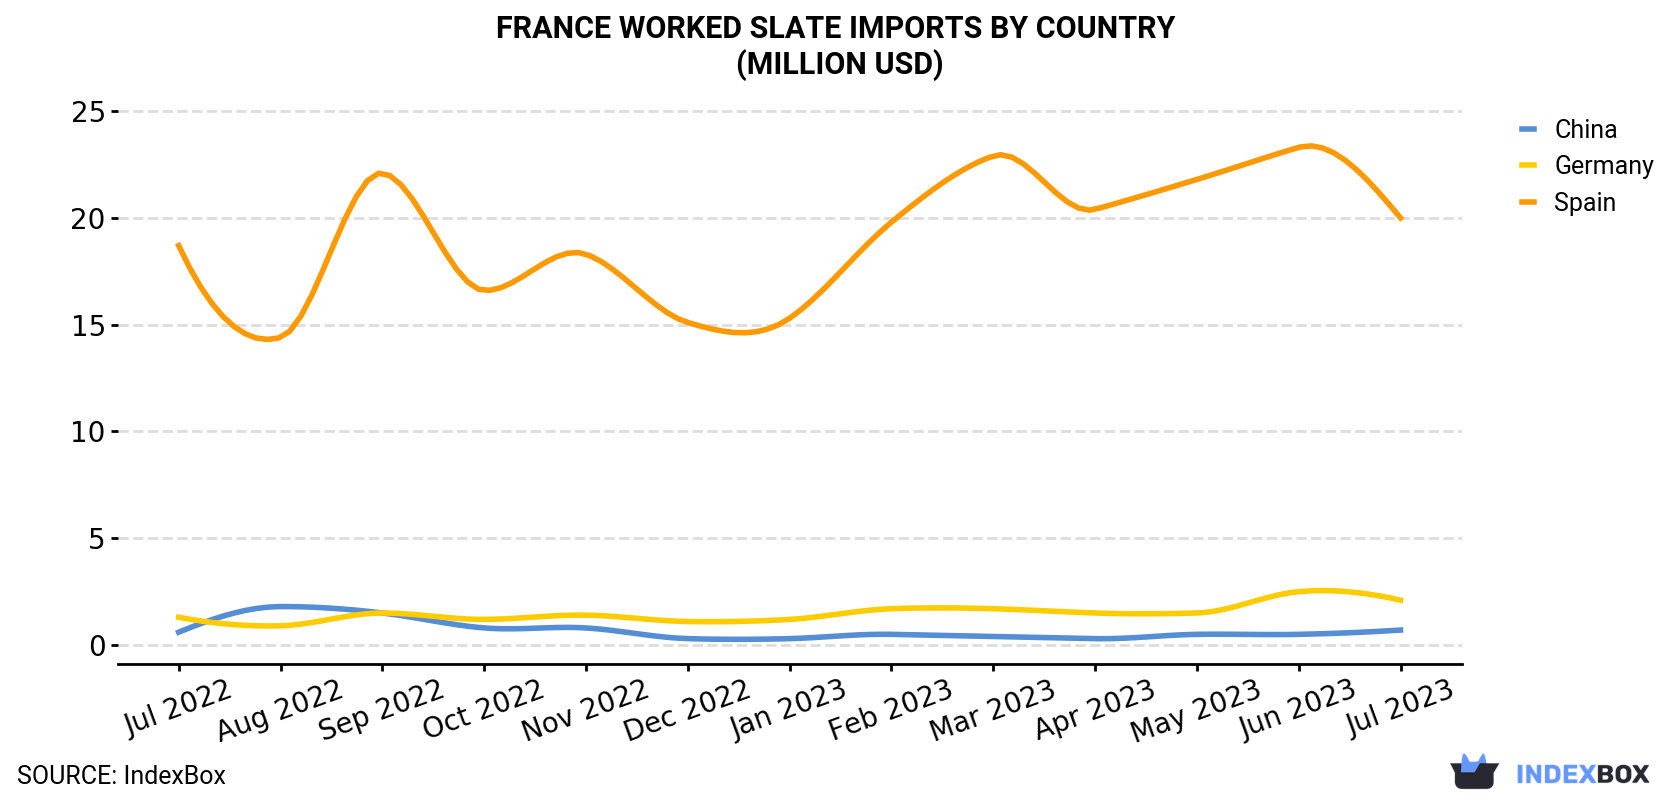 France Worked Slate Imports By Country (Million USD)